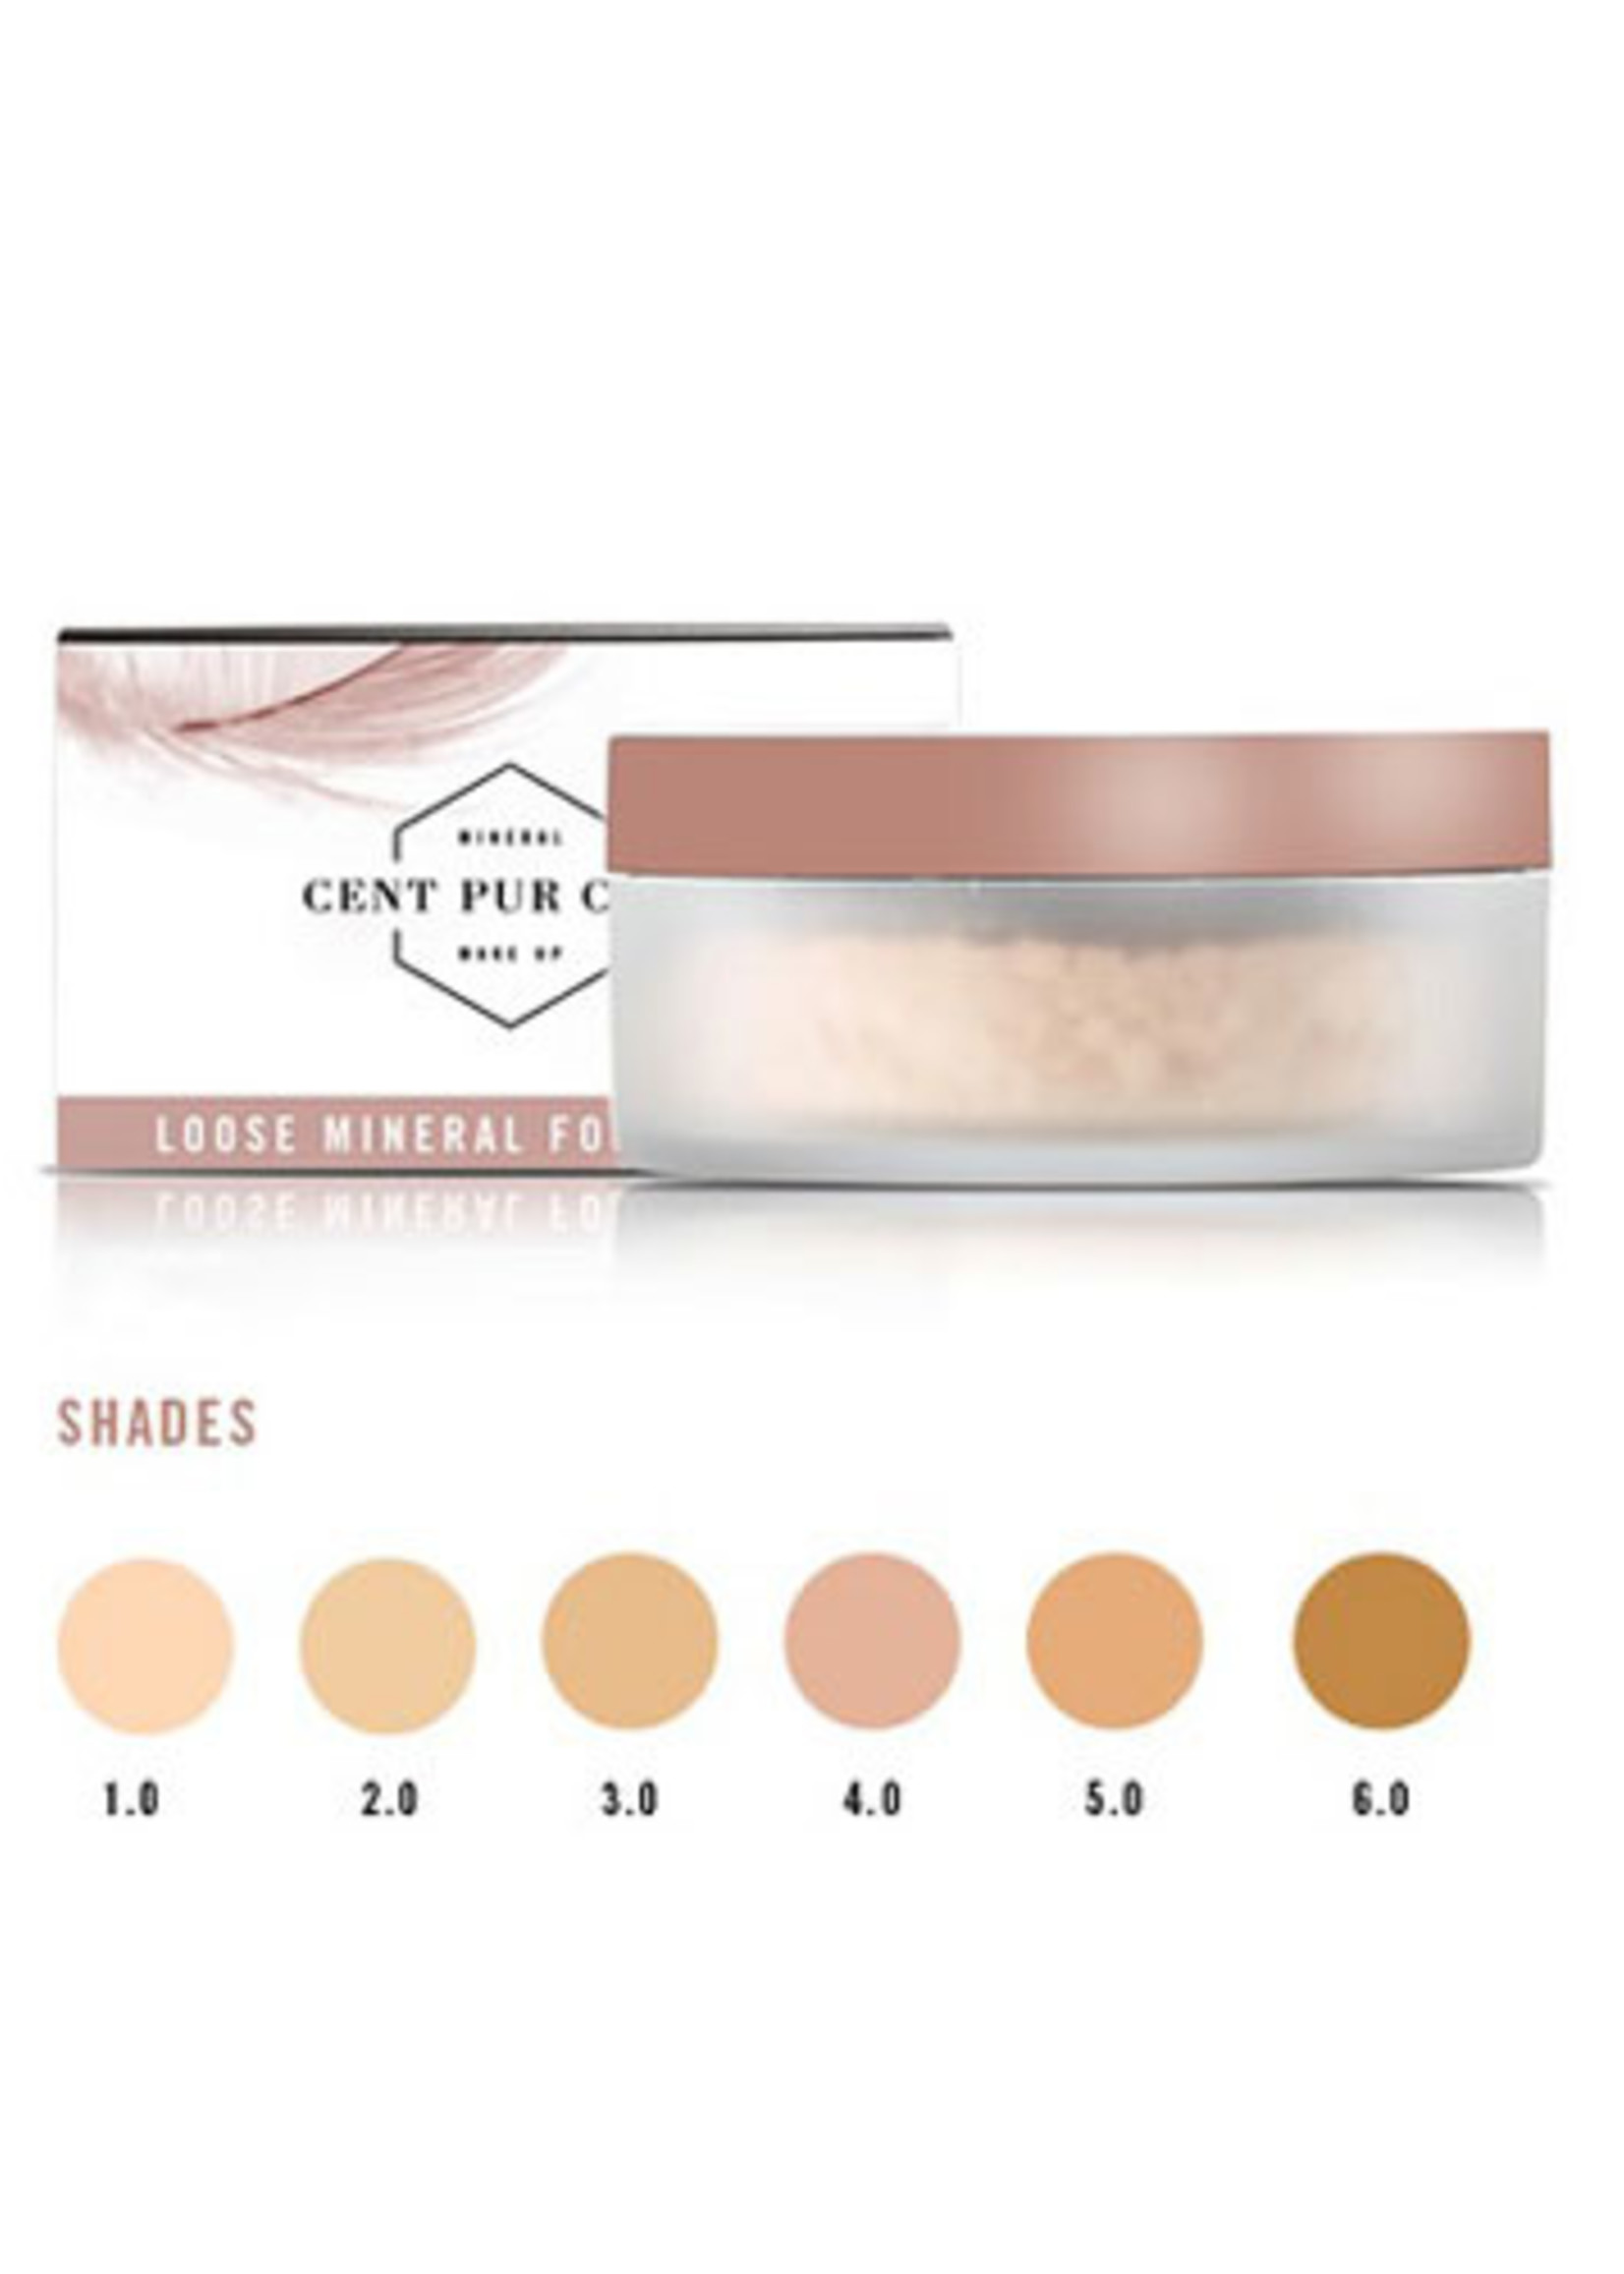 Cent Pur Cent Mineral Loose foundation 4.0